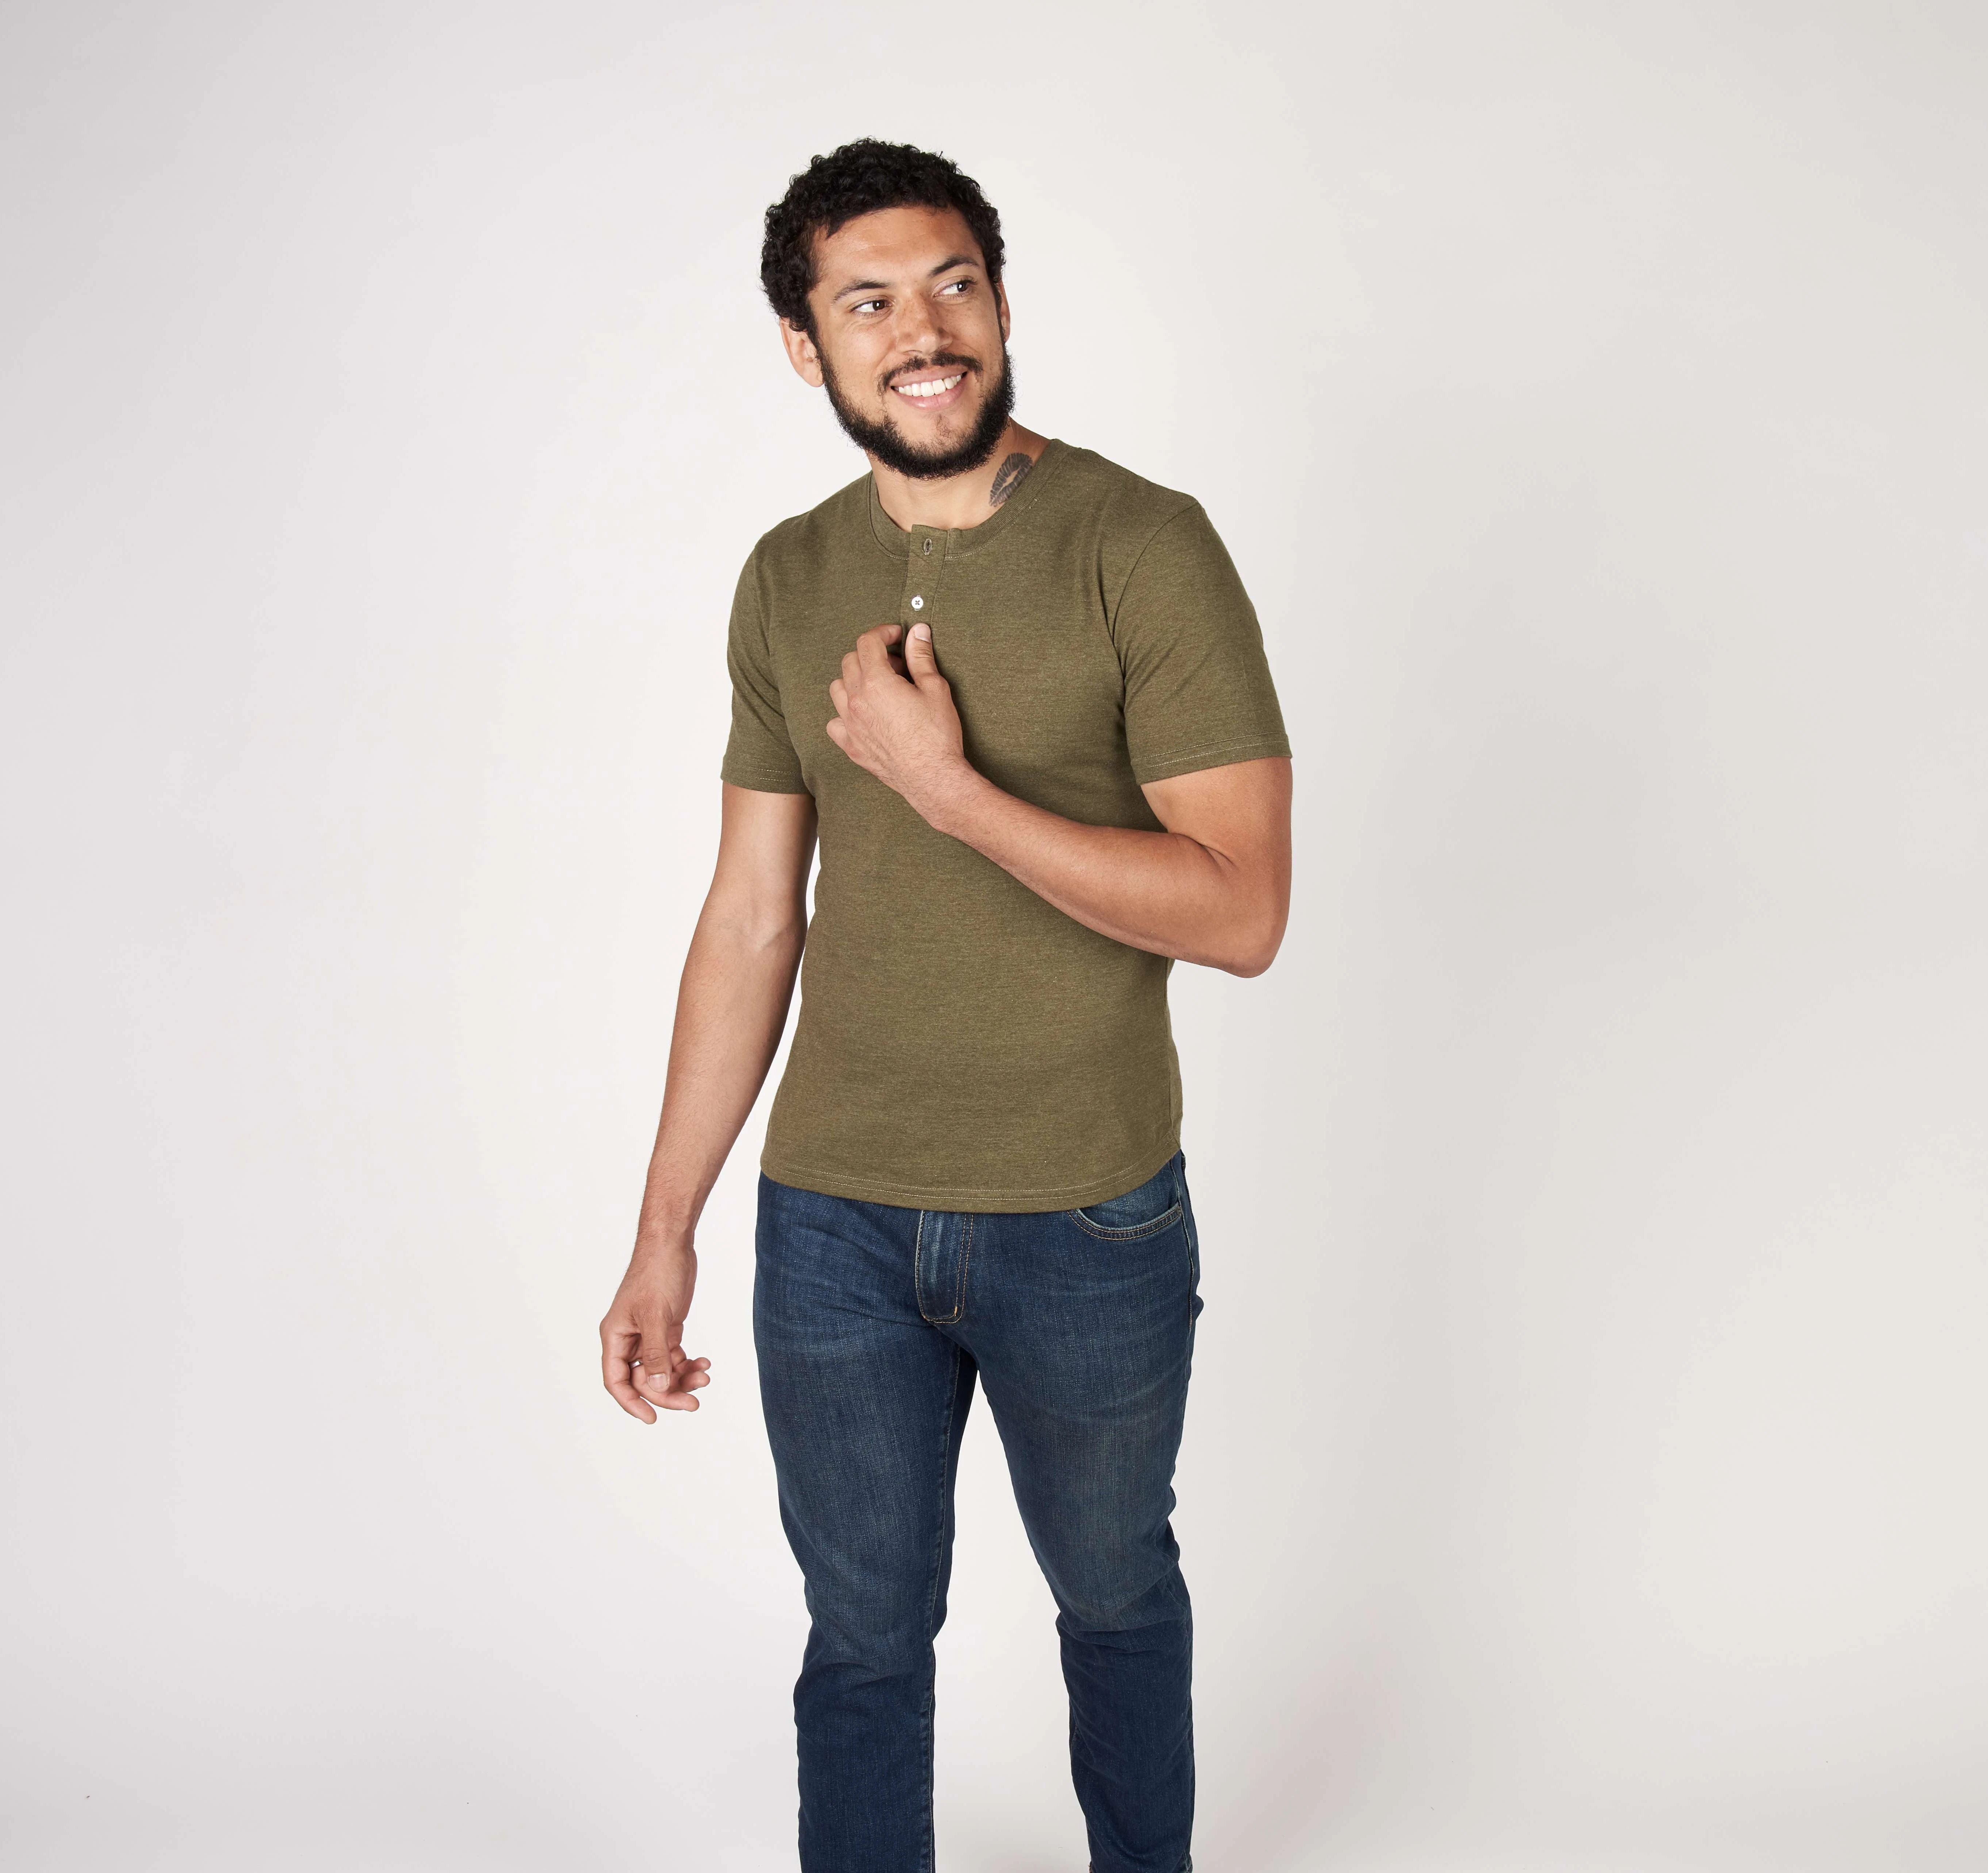 How to Wear a Henley Shirt - Style Guide